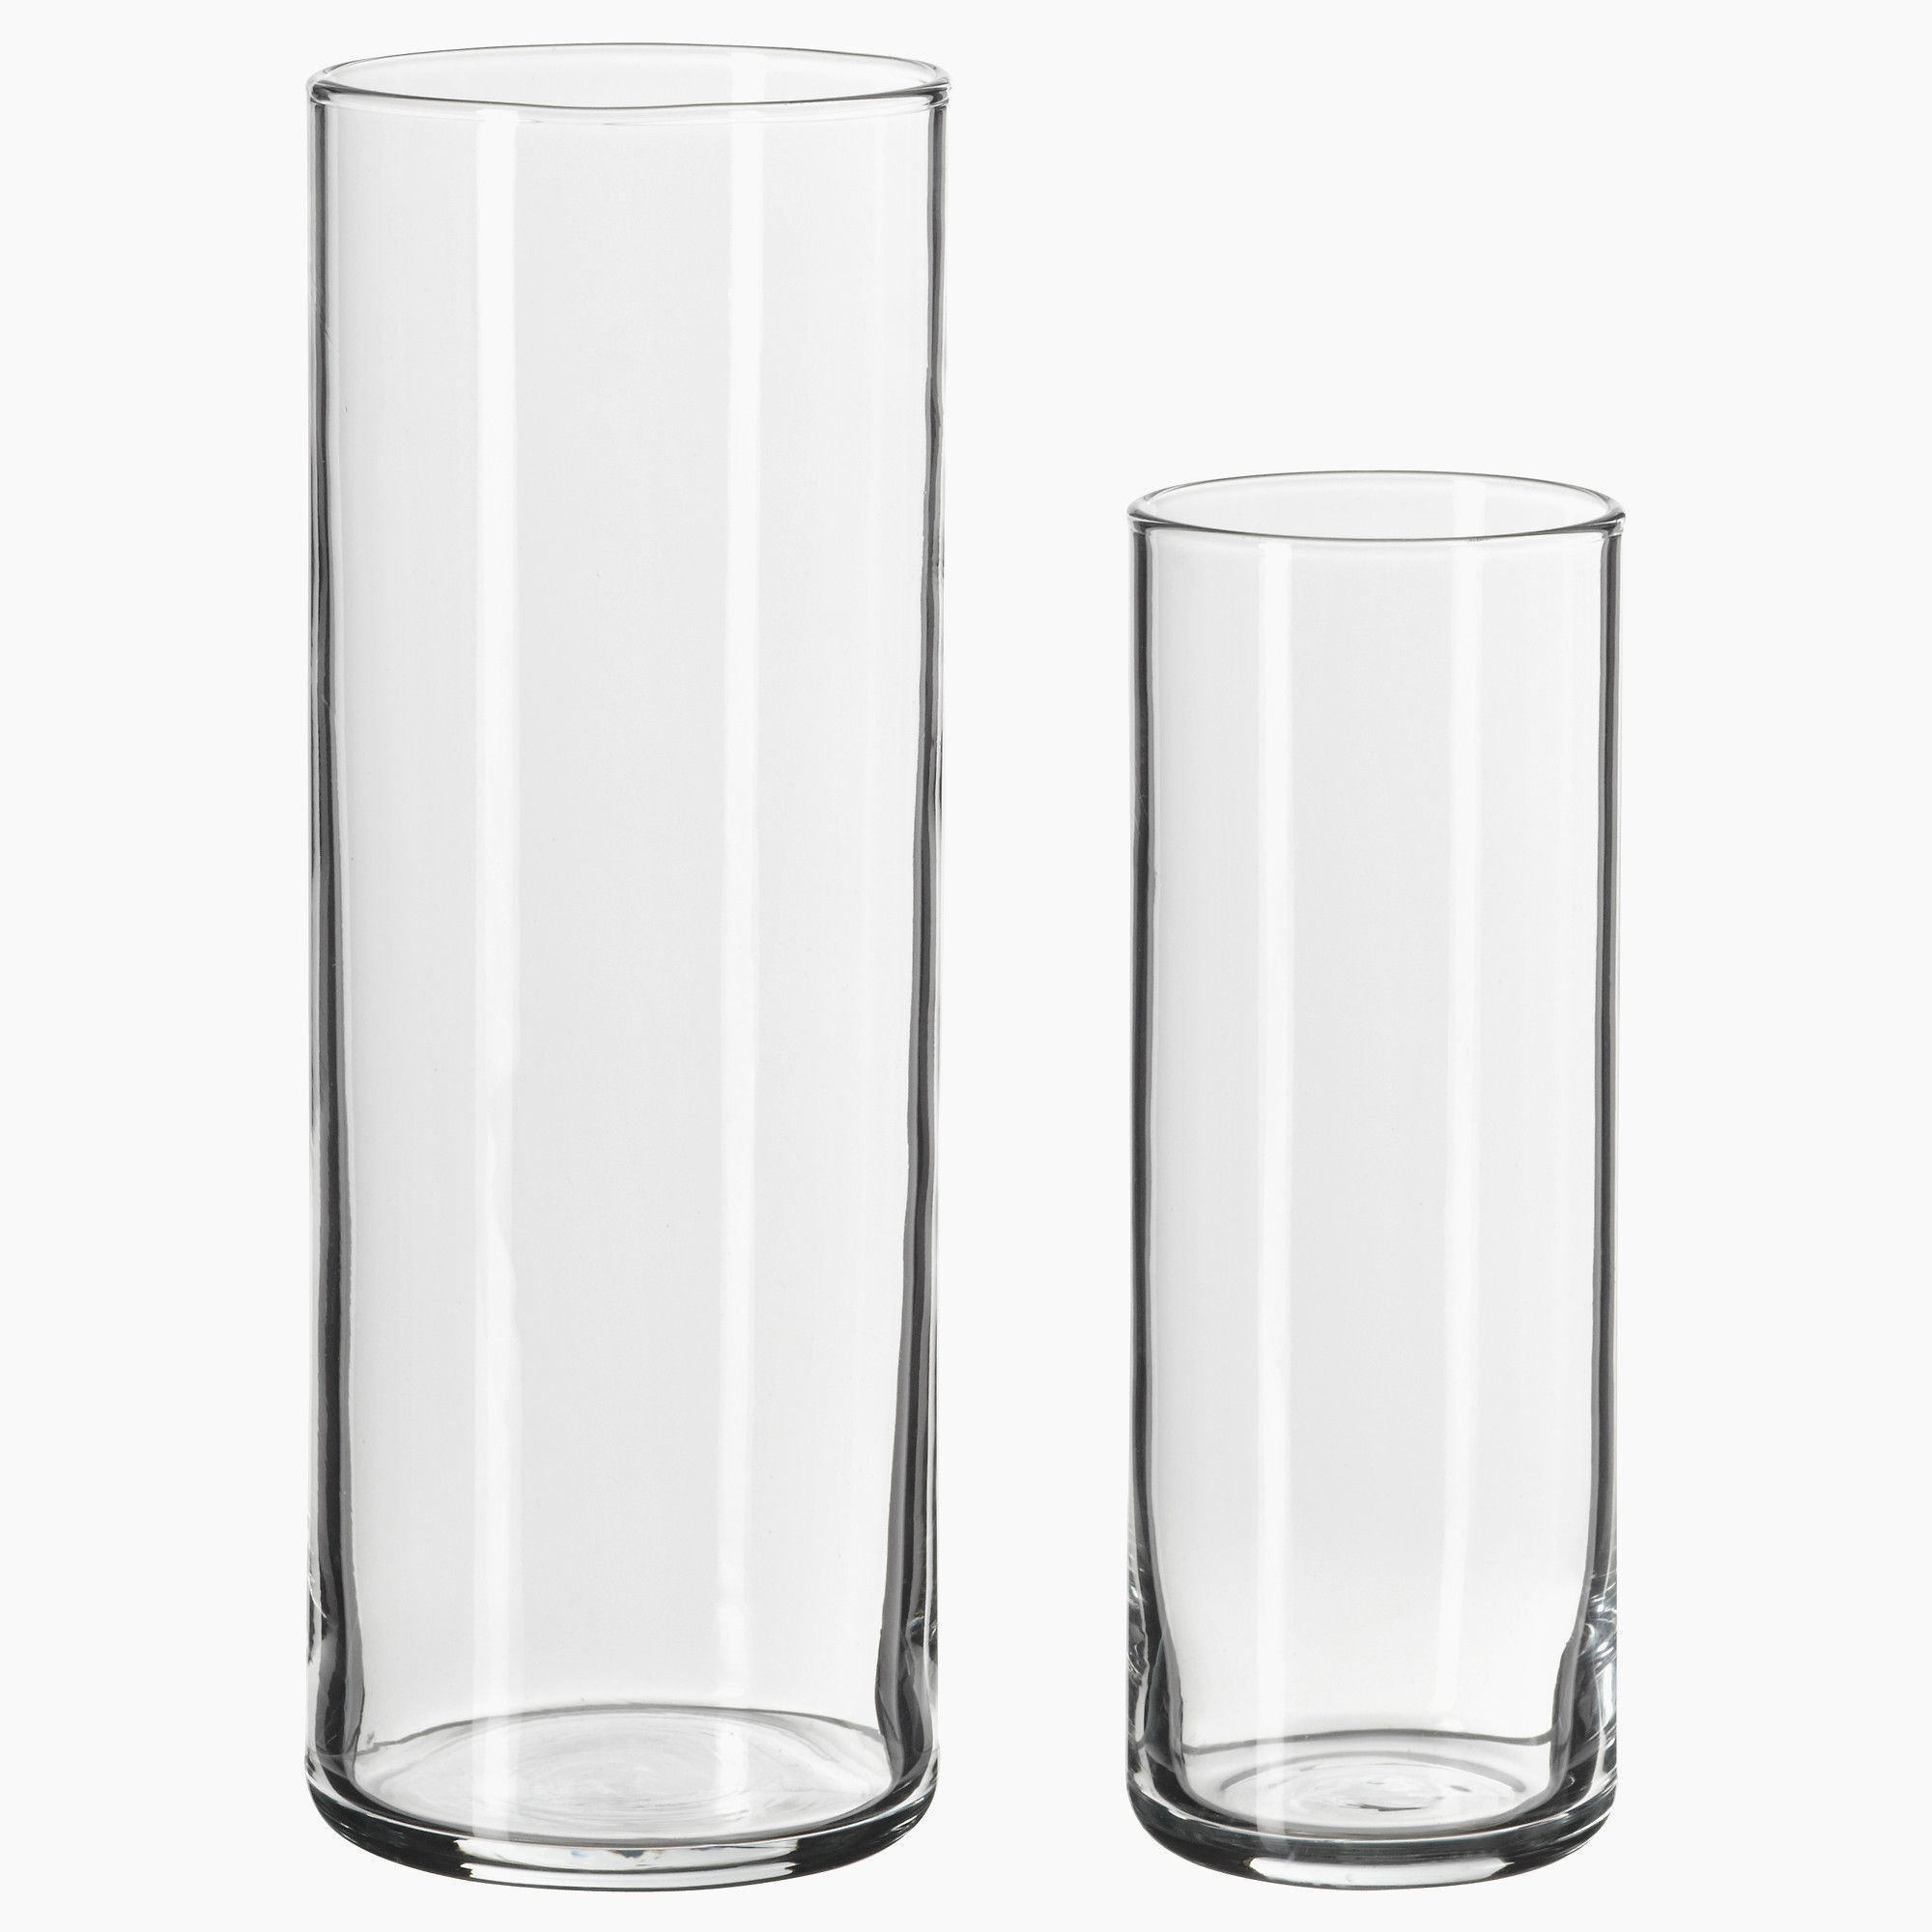 13 Great Clear Glass Vases for Sale 2024 free download clear glass vases for sale of 24 tall vases for sale the weekly world in wooden wall vase new tall vase centerpiece ideas vases flowers in